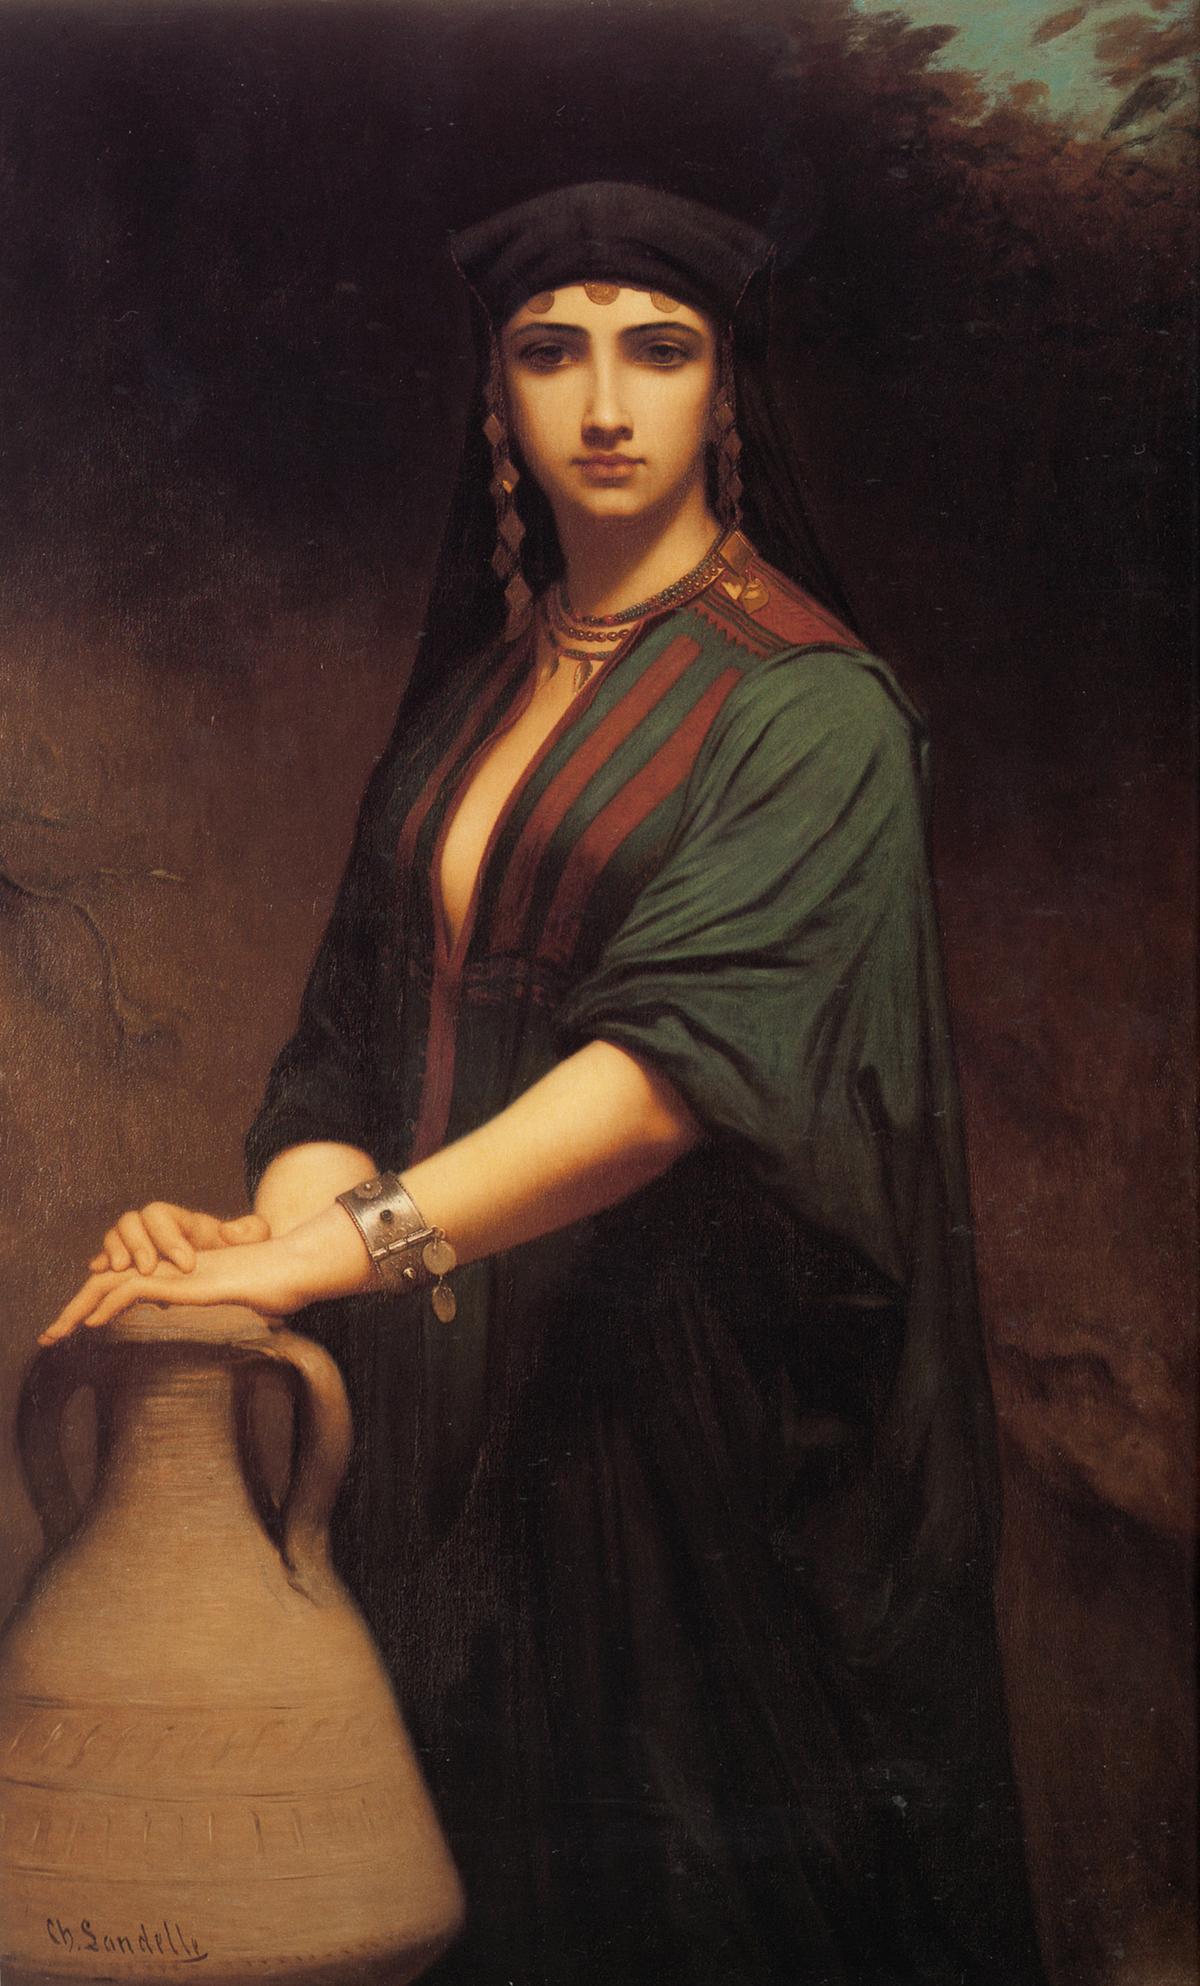 "Femme Fellah" ("Woman Fellah"), 1866, by Charles Landelle . Oil on canvas. Private collection. (Public Domain)